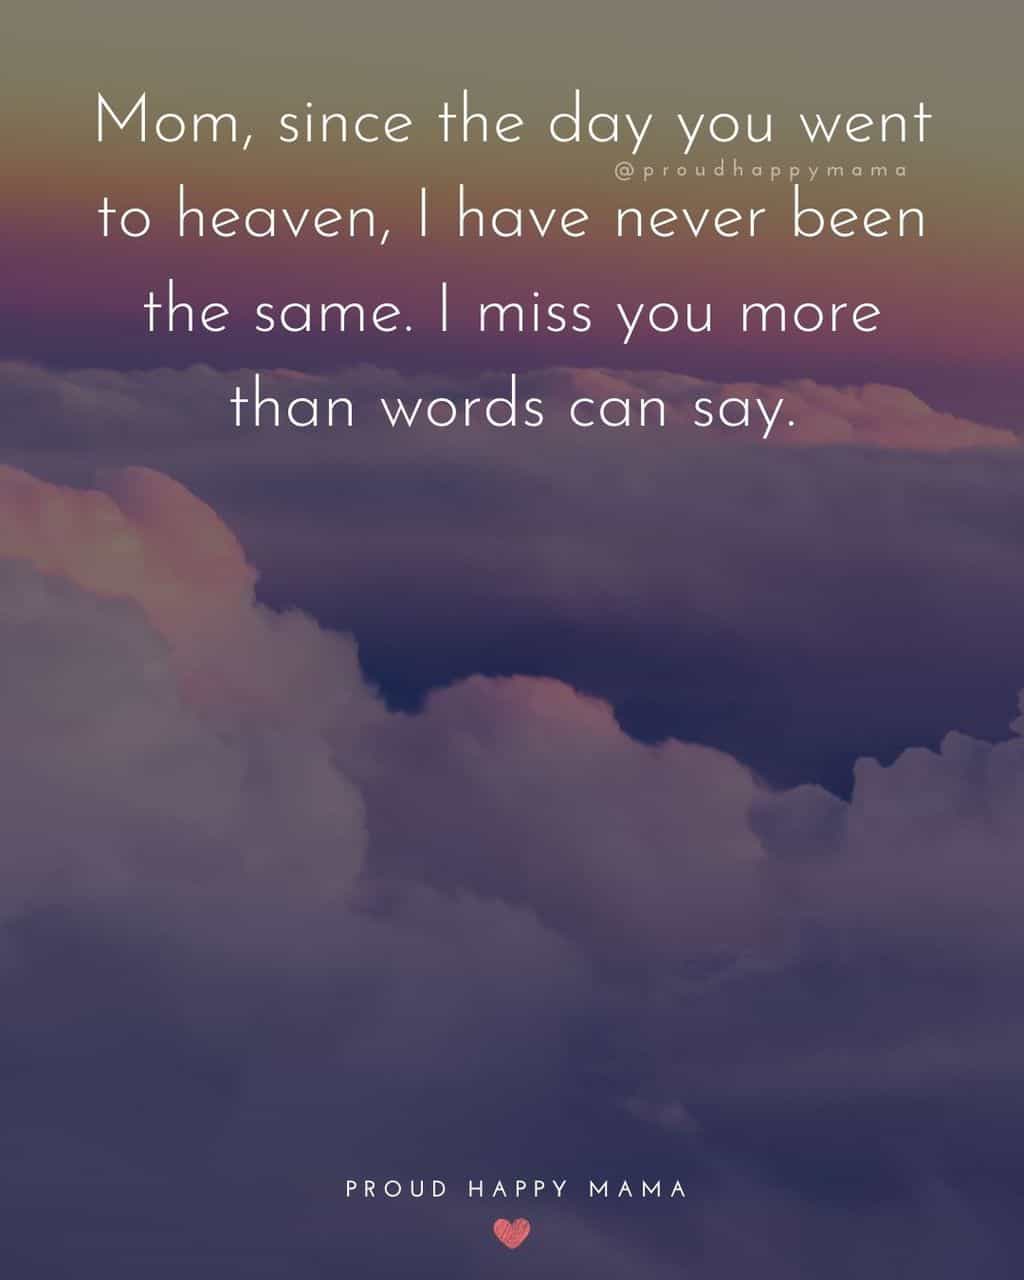 Clouds with pink and purple sunrise with text overlay, ‘Mom, since the day you went to heaven, I have never been the same. I miss you more than words can say.’